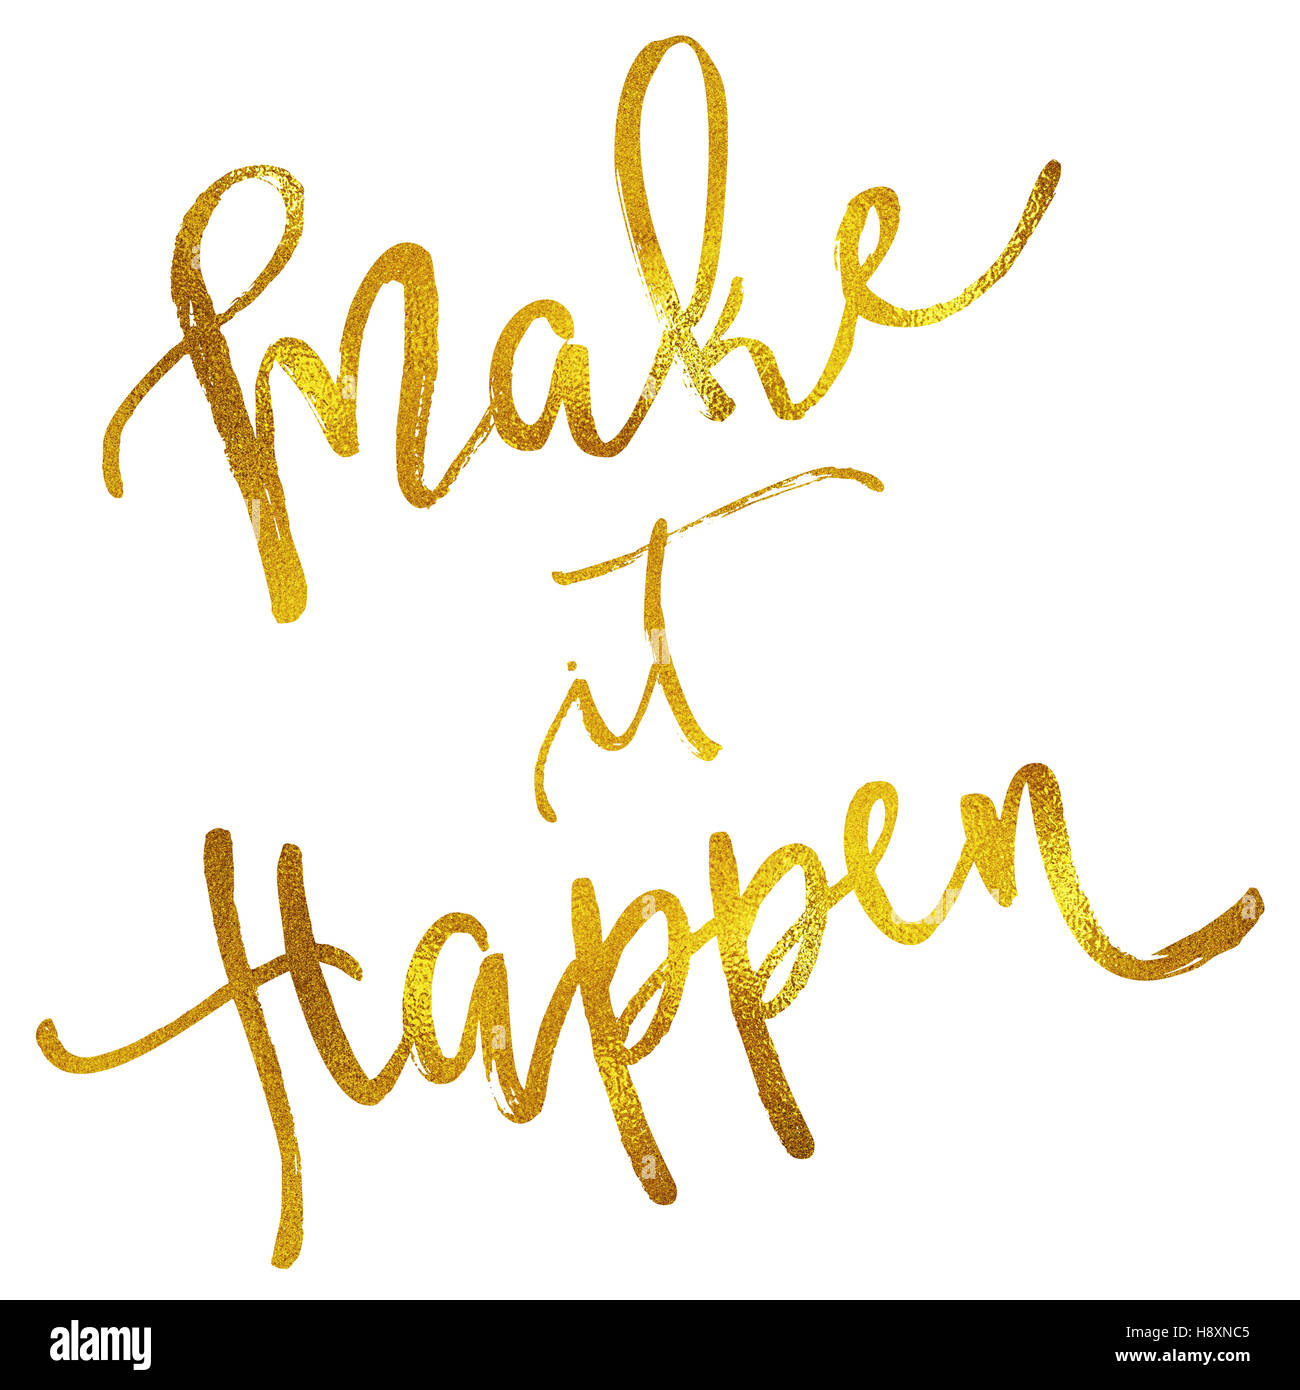 Make it Happen Gold Faux Foil Metallic Motivational Quote Isolated Stock Photo